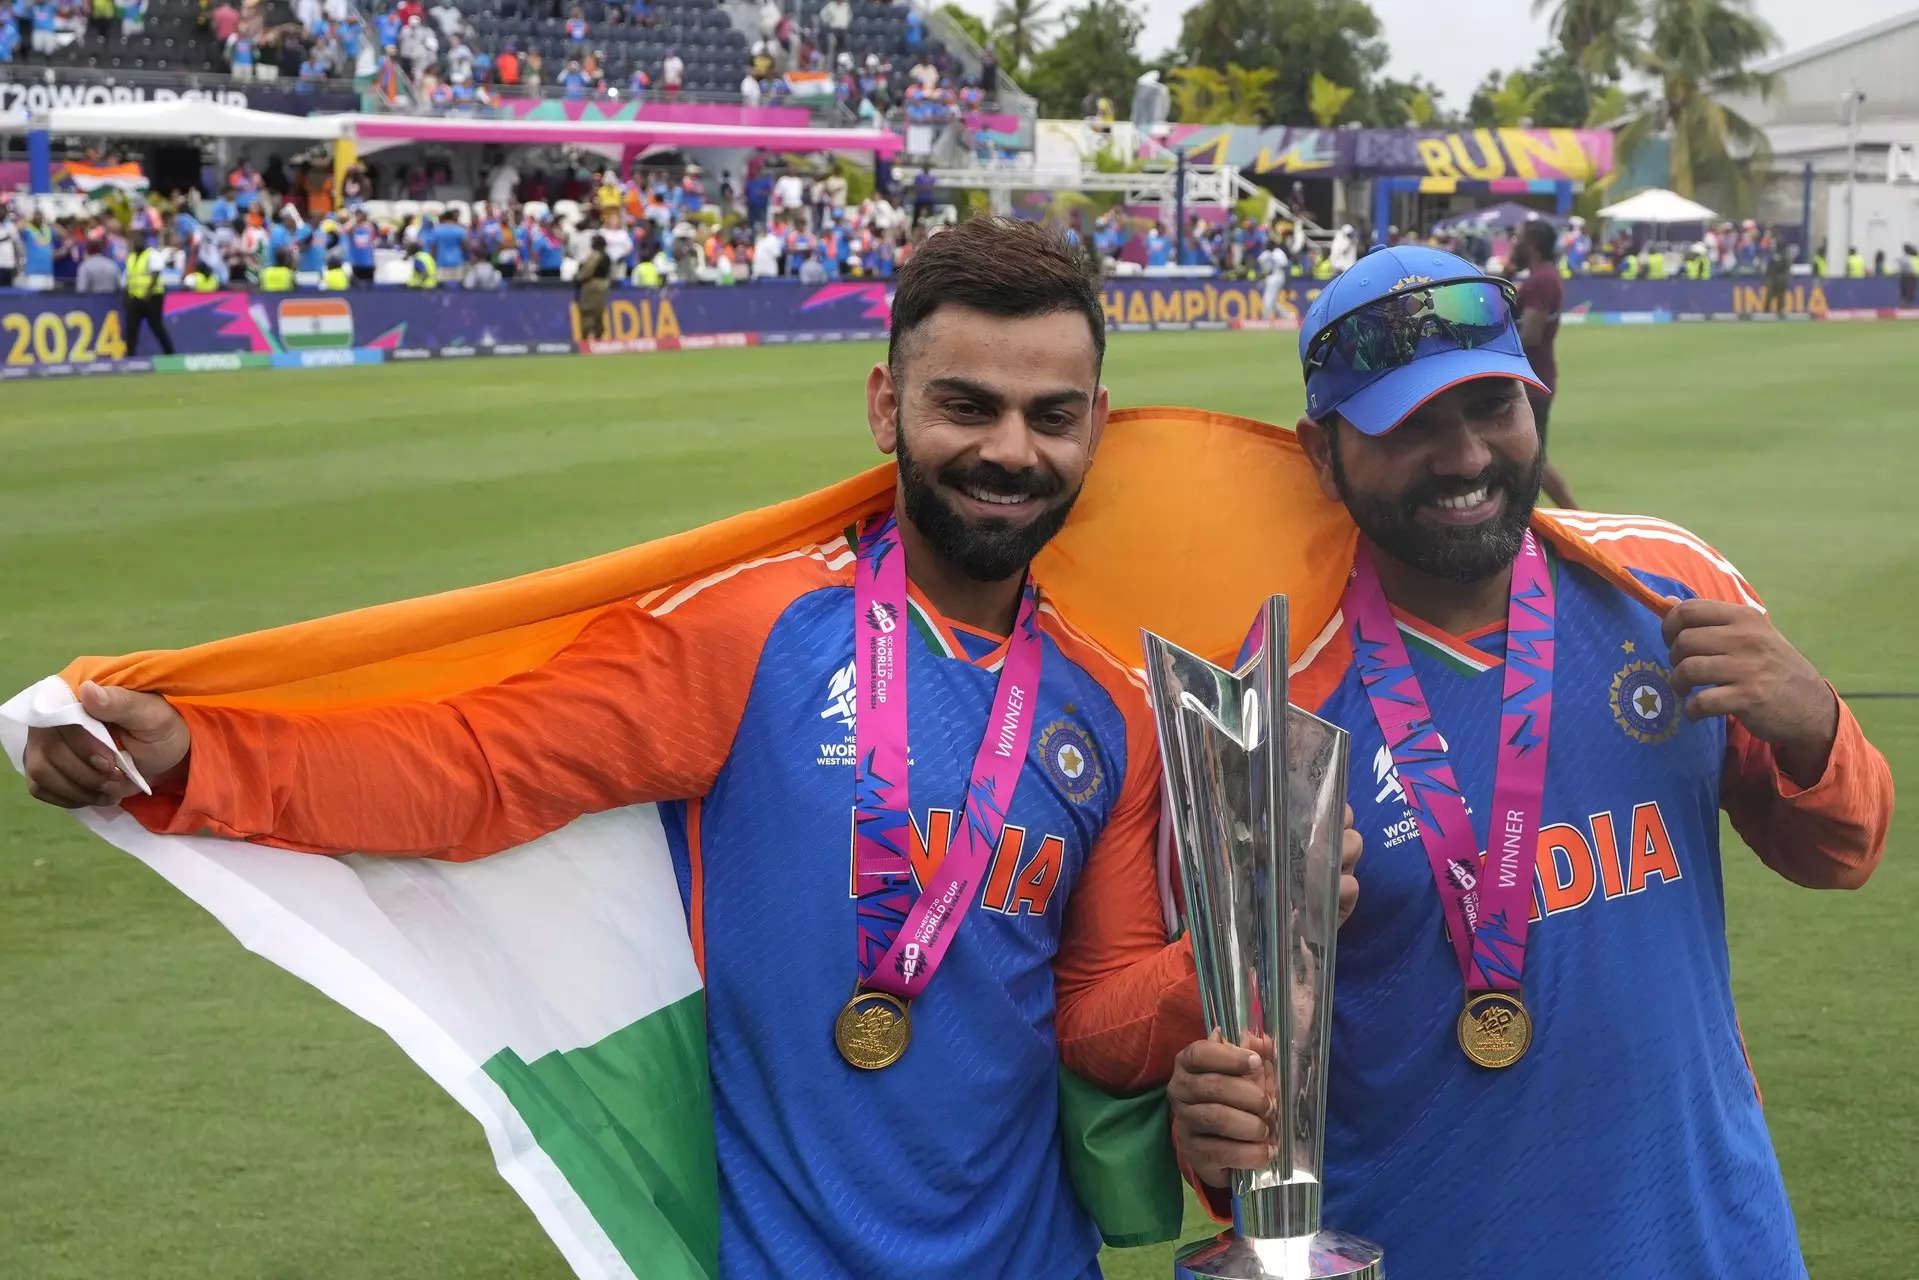 Retirement benefit: Timely departure of big guns gives space to groom players for 2026 WC 